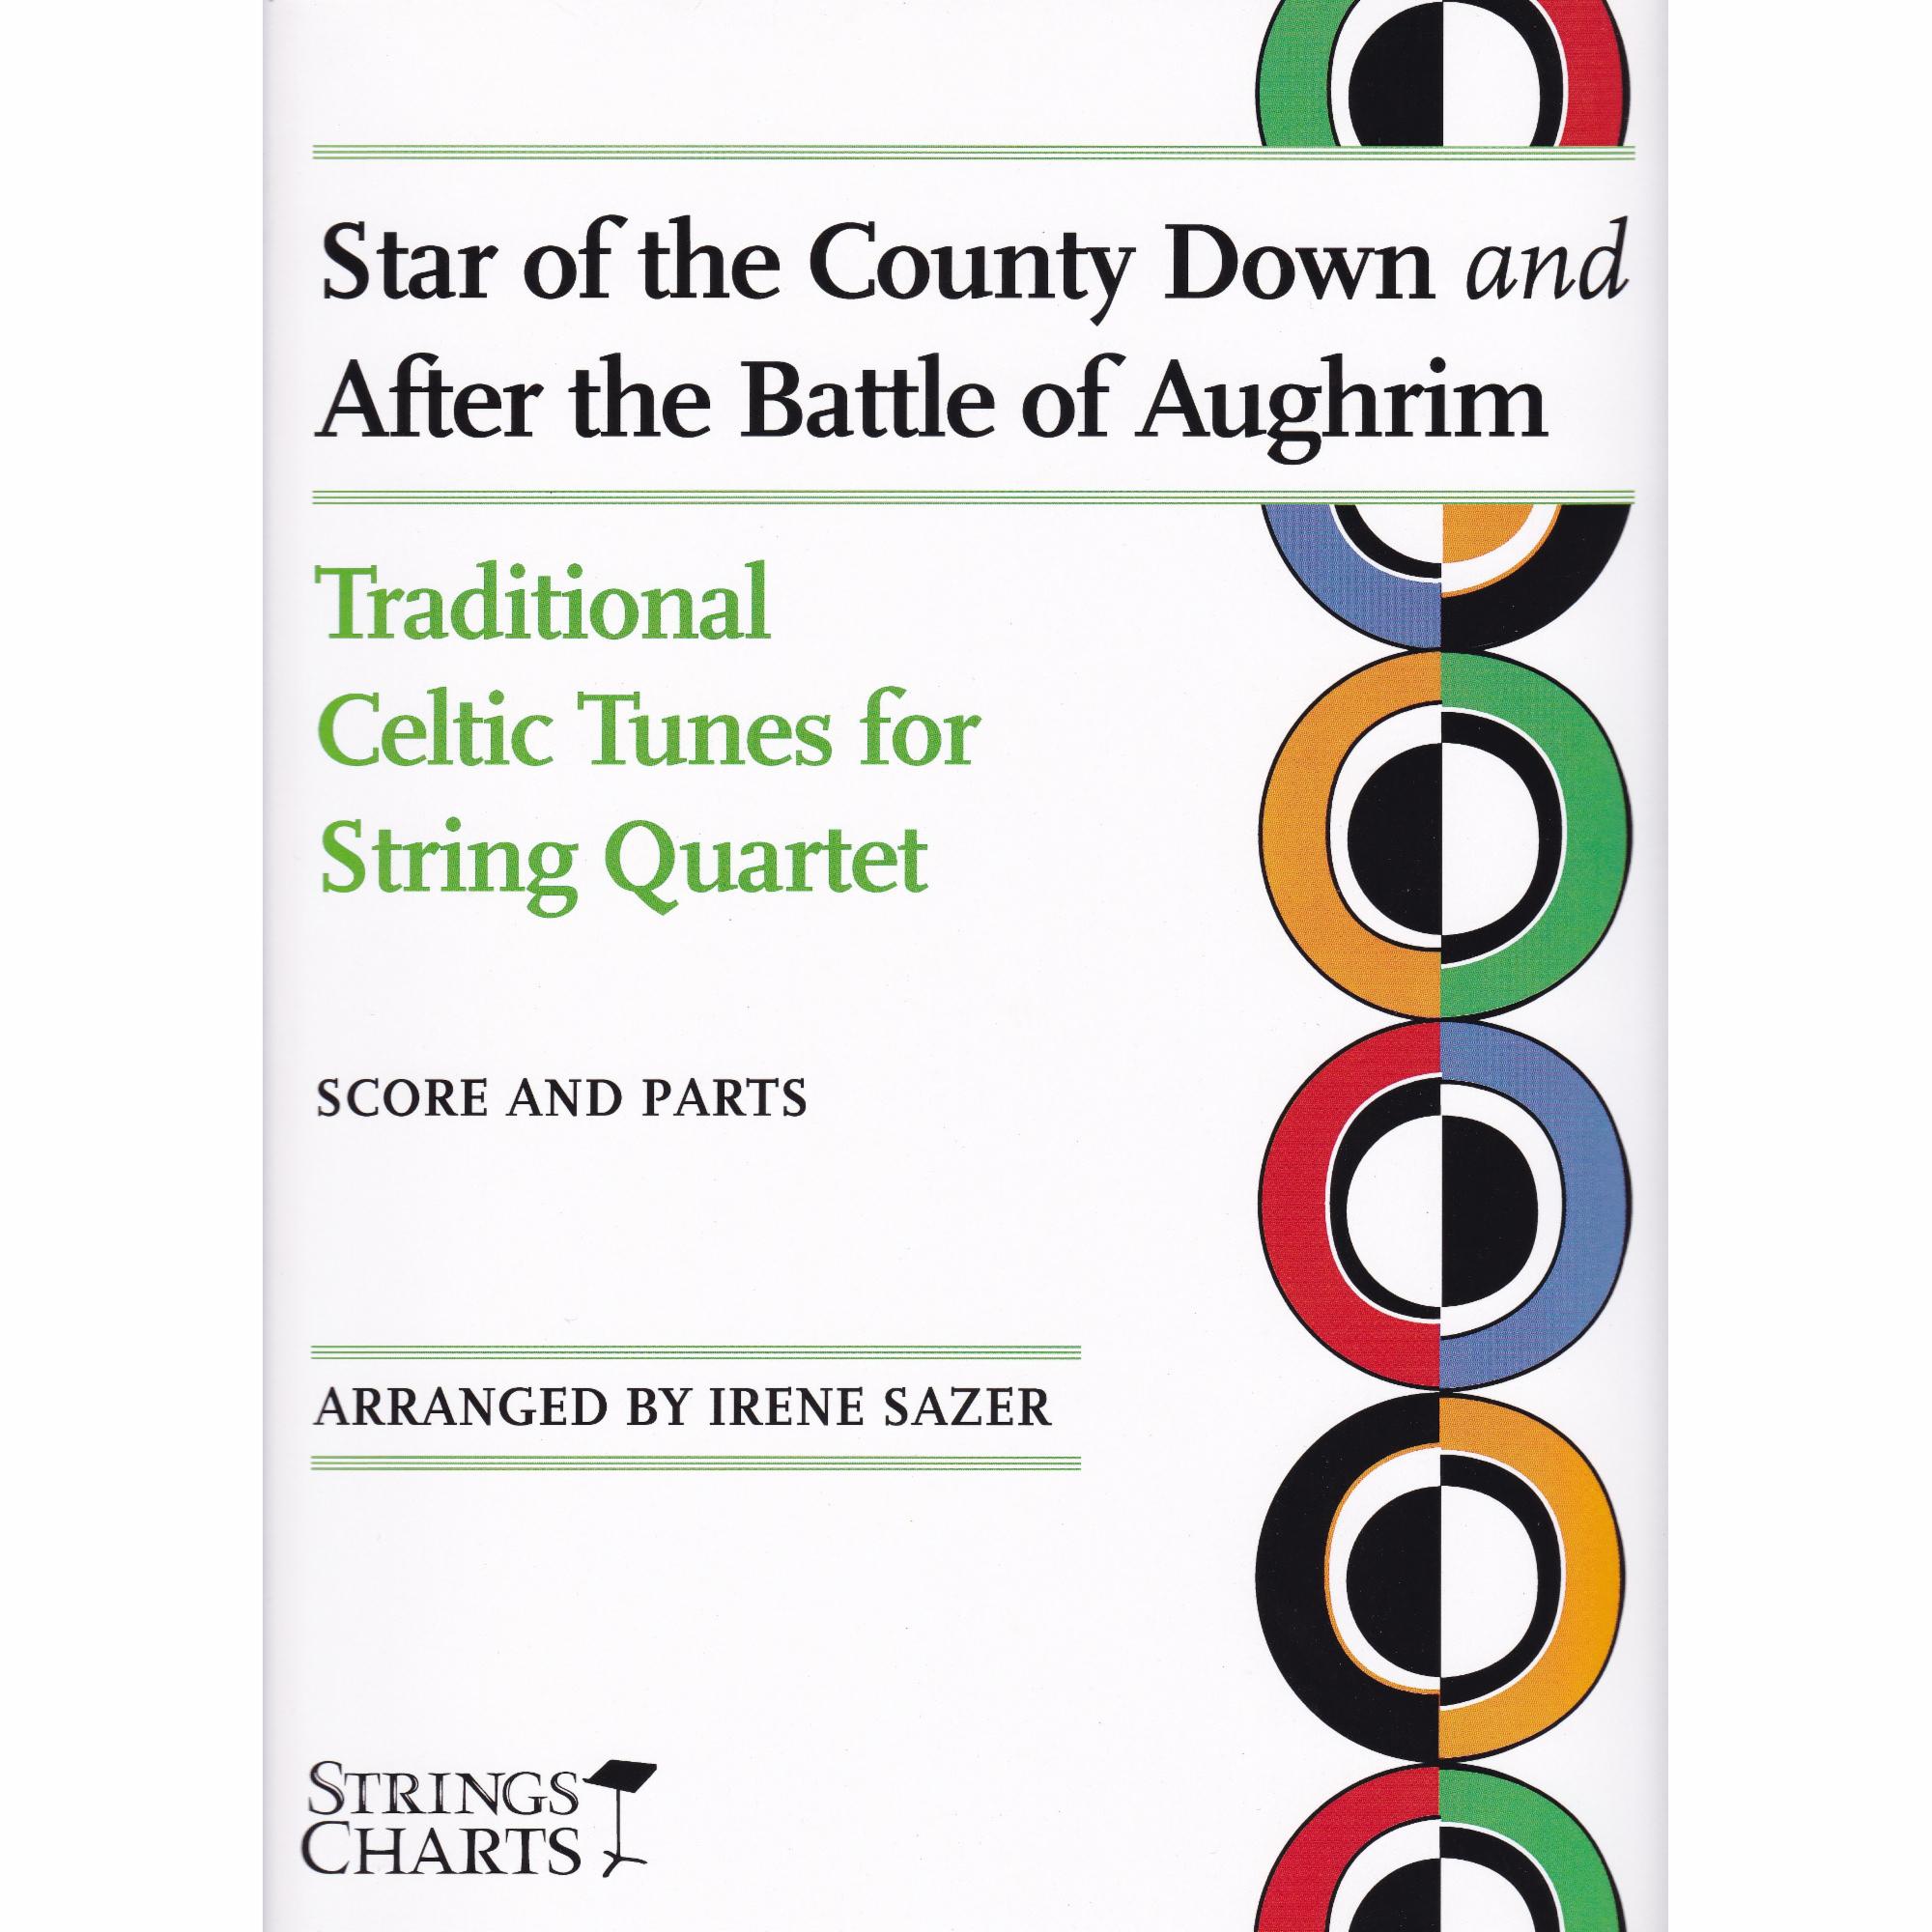 Two Traditional Celtic Tunes for String Quartet